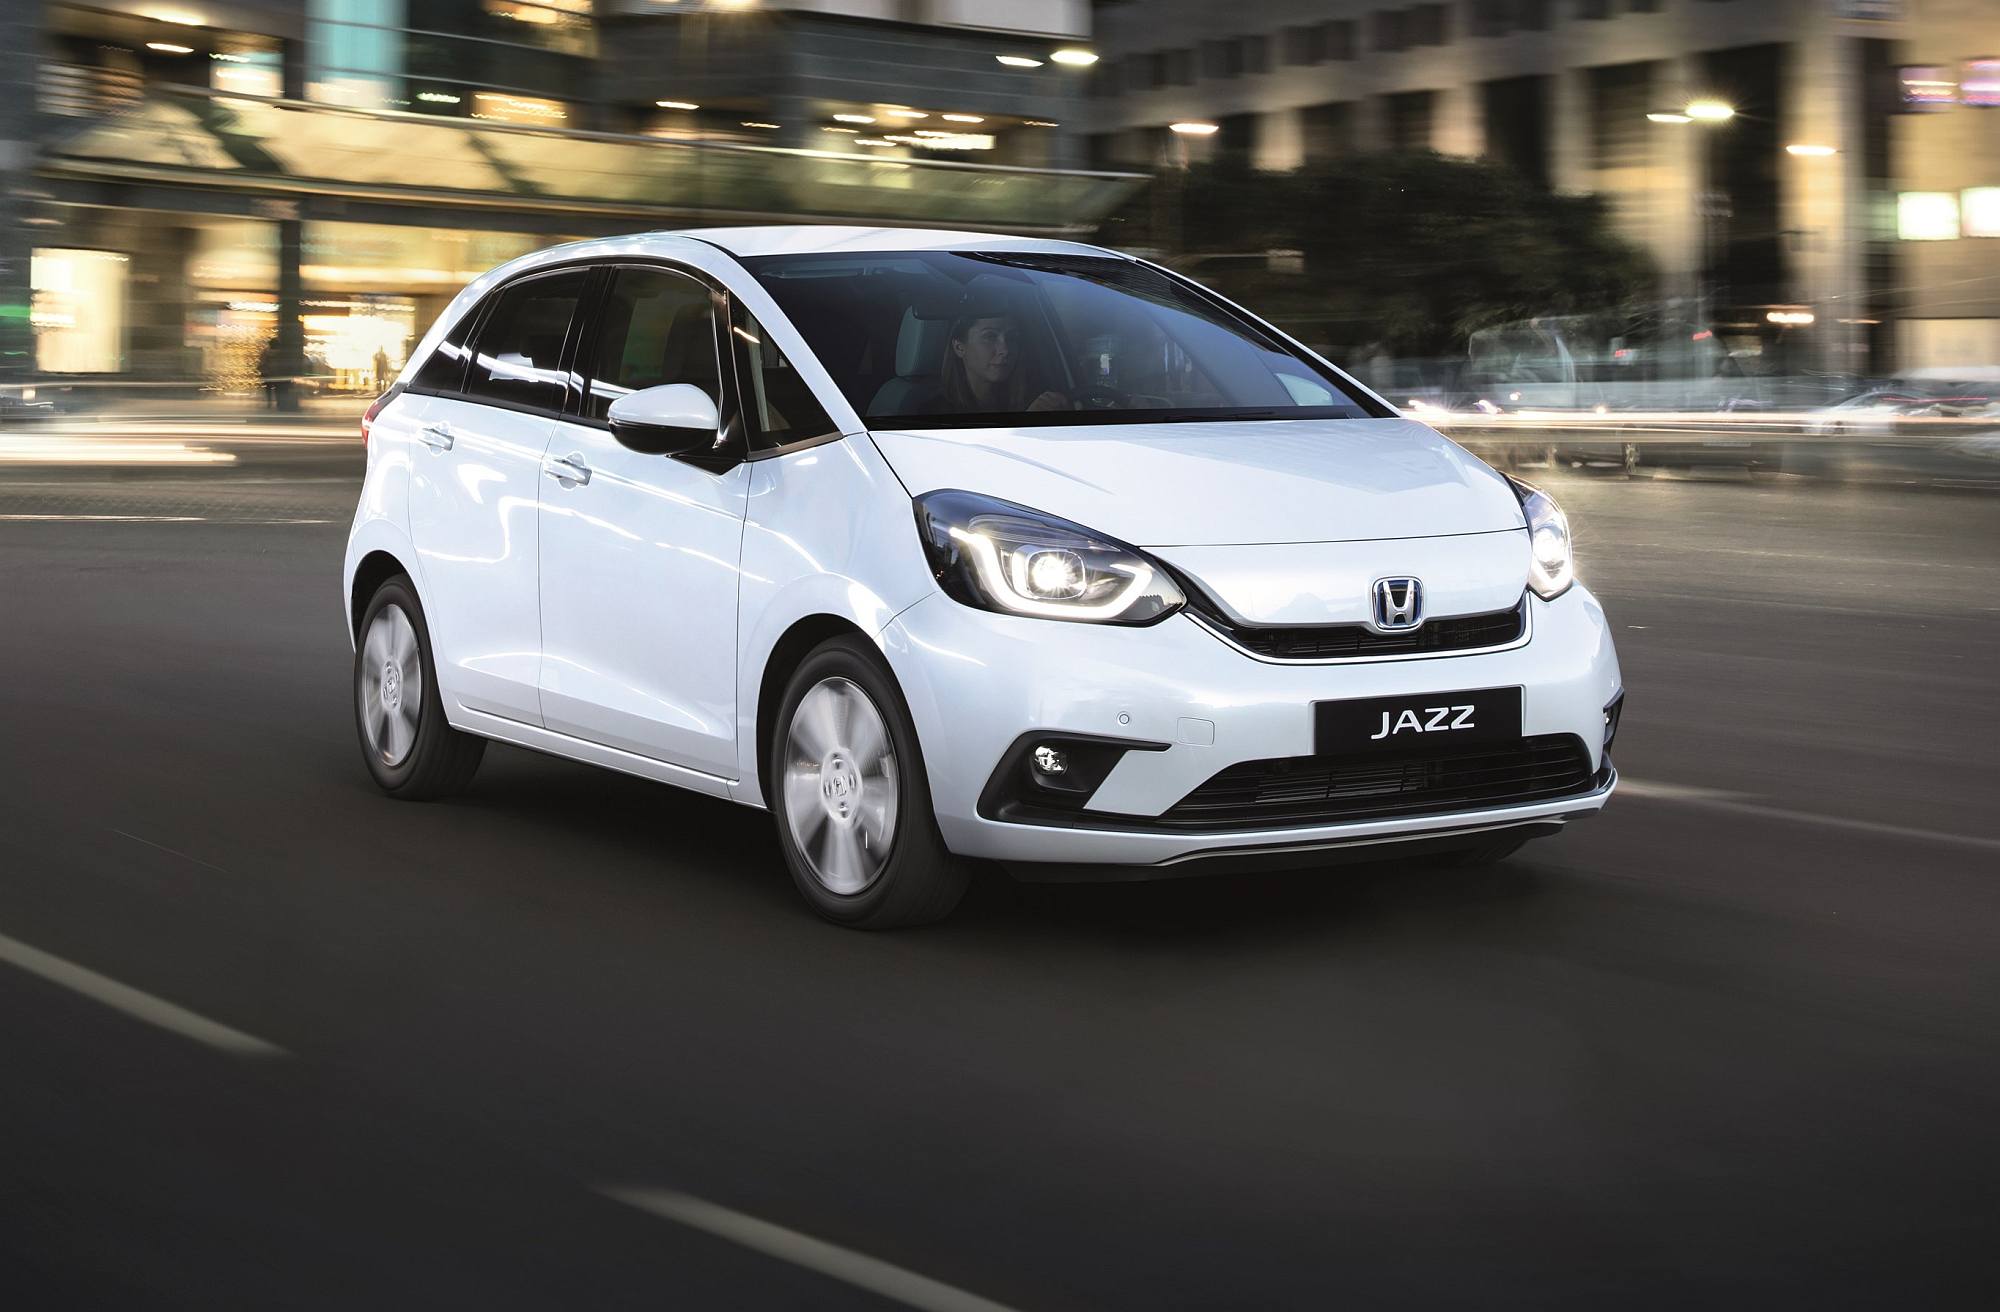 200541_ALL-NEW_HONDA_JAZZ_DELIVERS_POWERFUL_HYBRID_PERFORMANCE_AND_ADVANCED